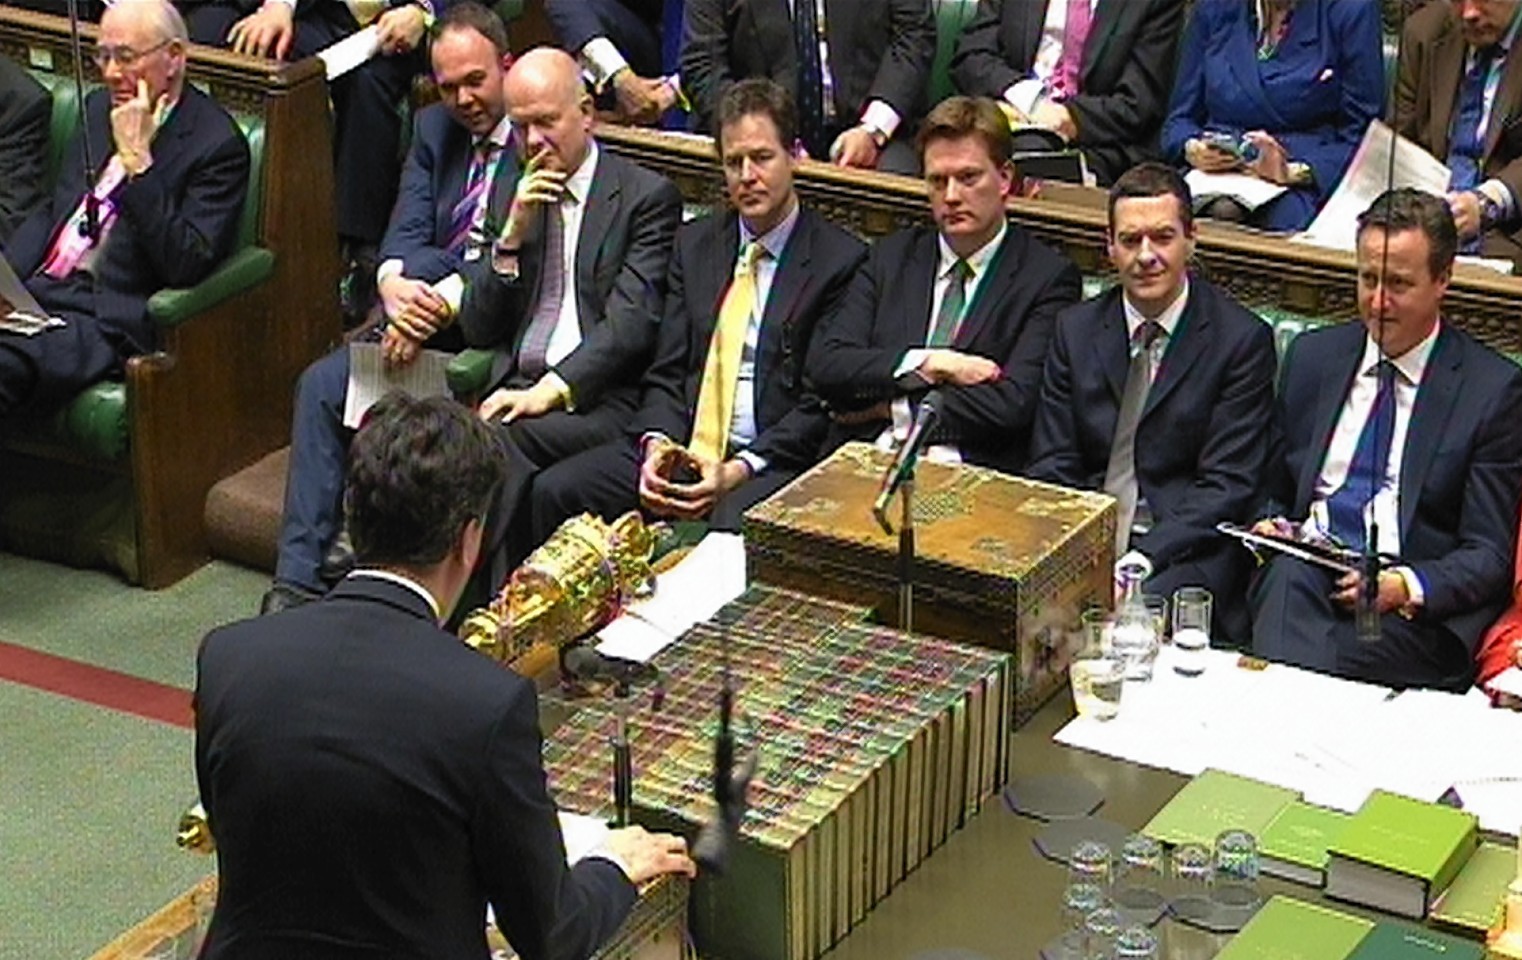 Labour leader Ed Miliband responds to Chancellor of the Exchequer George Osborne's Budget statement to the House of Commons, London. PRESS ASSOCIATION Photo. Picture date: Wednesday March 18, 2015. See PA story BUDGET Main. Photo credit should read: PA Wire